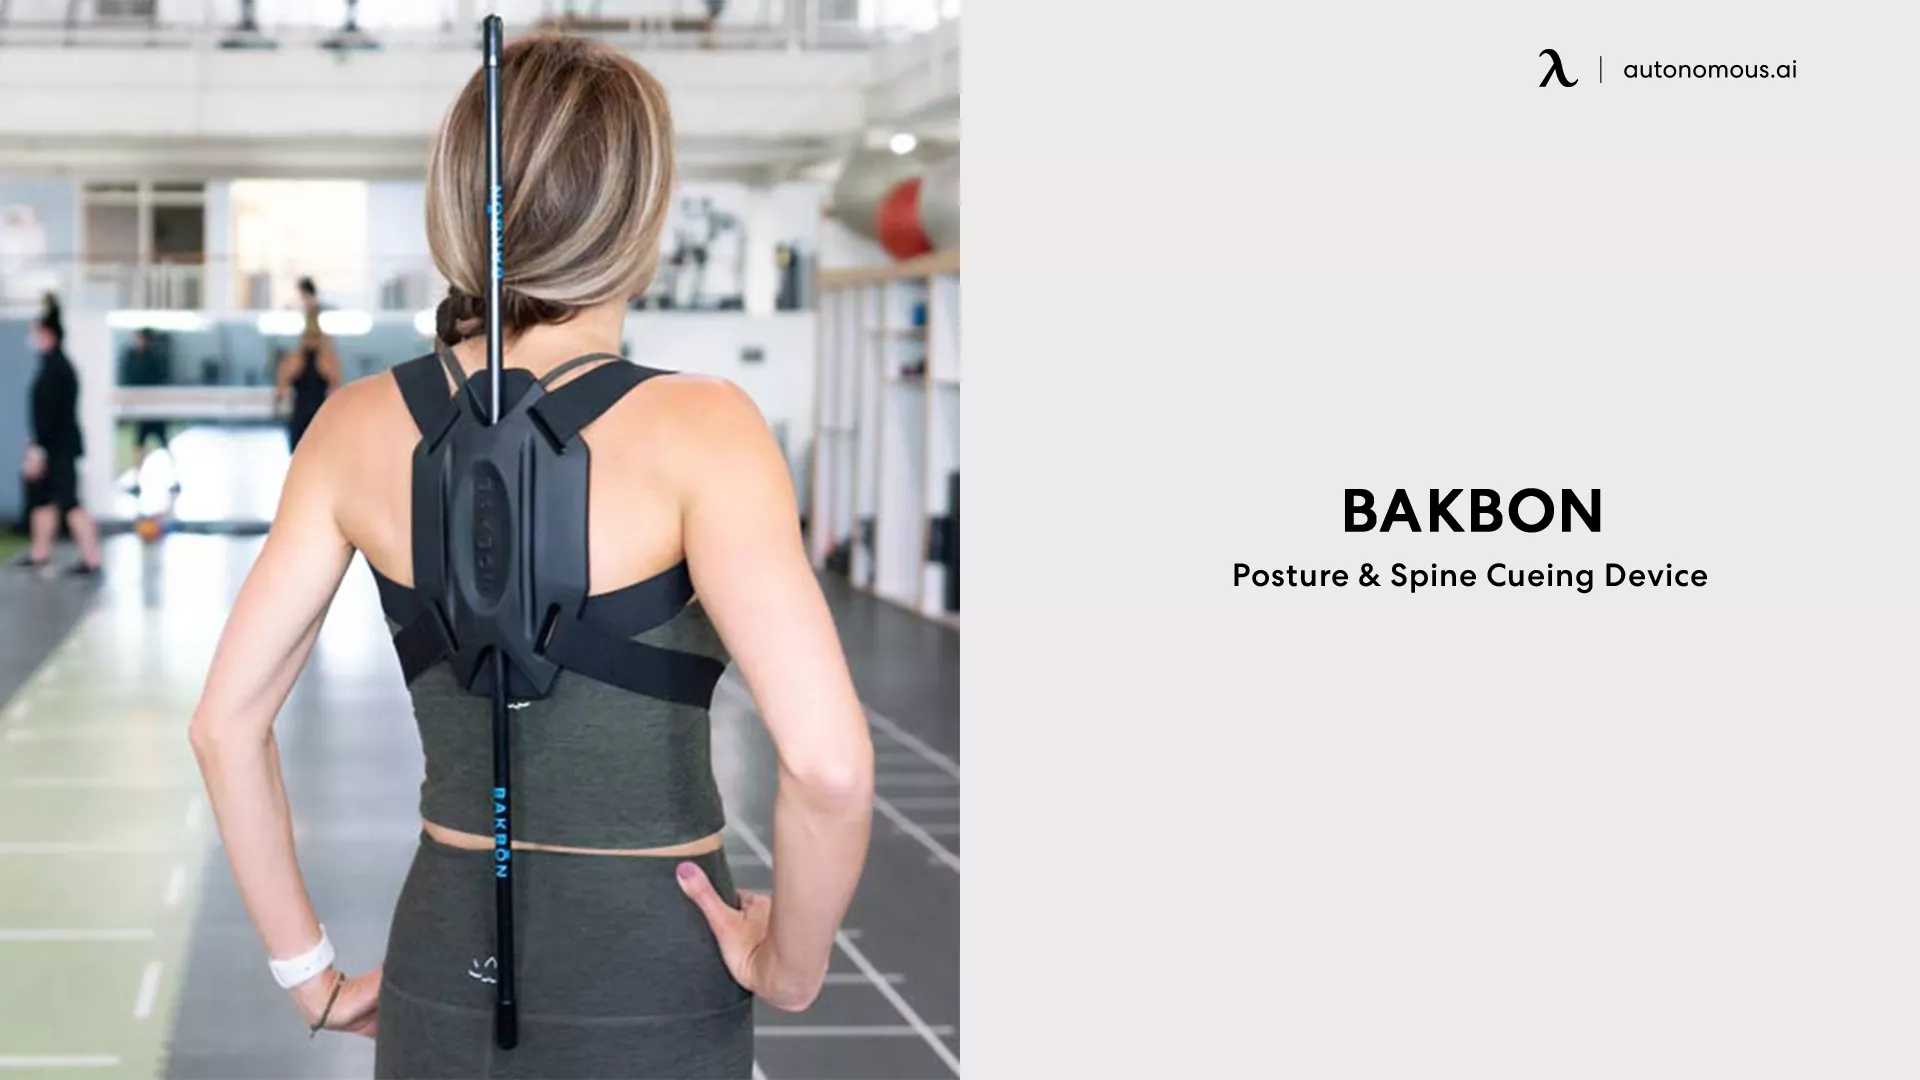 Posture & spine cueing device by BakBon